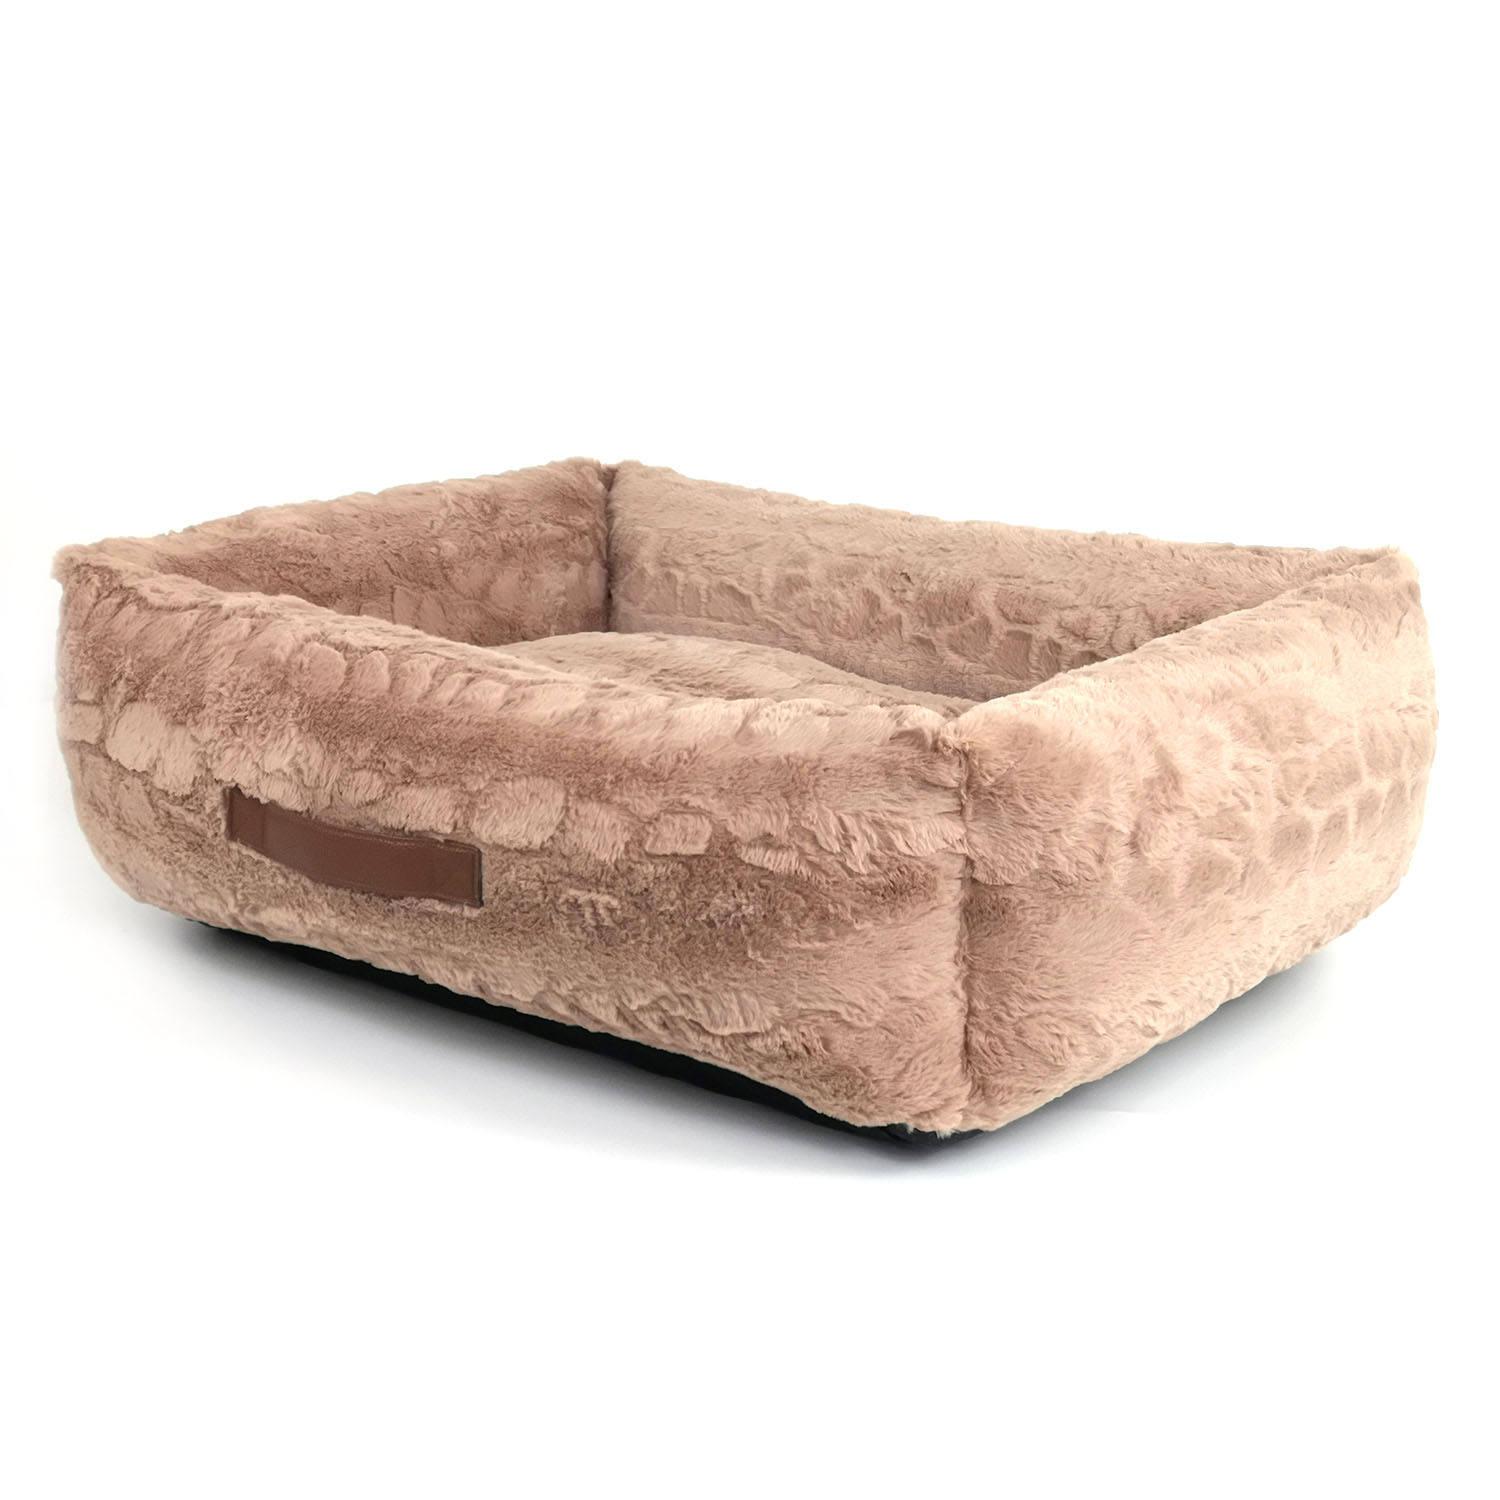 pet Washable Soft Plush Calming Dog Bed Deluxe Plush Dog Crate Benti Pet Cushion Mat Sofa With Plush Pillow Dog Bed